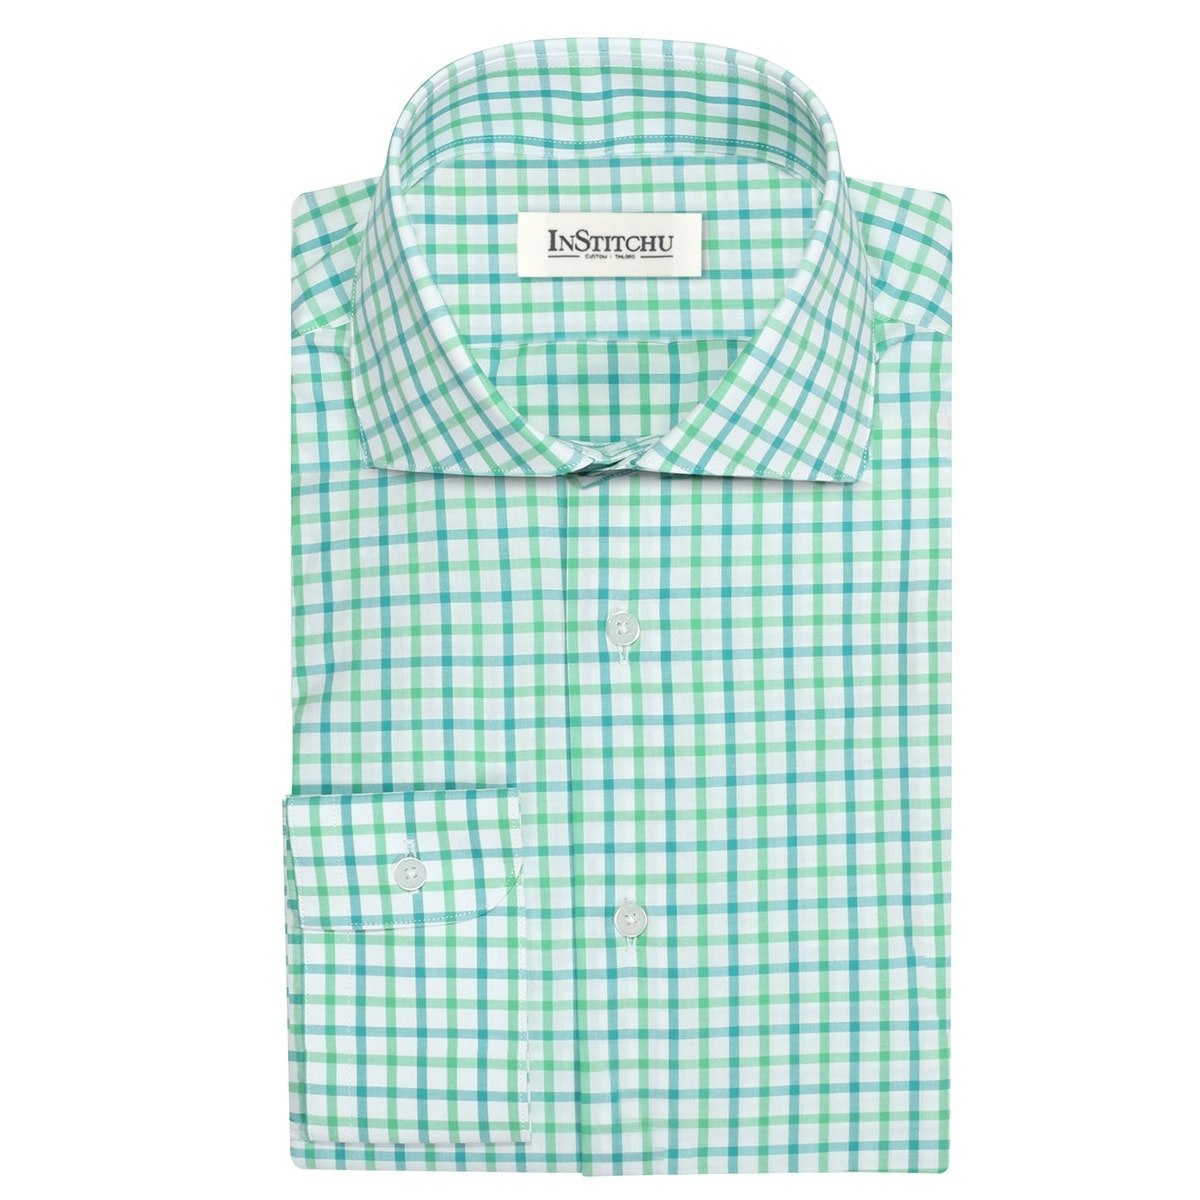 InStitchu Collection The Taylors Green Check Shirt